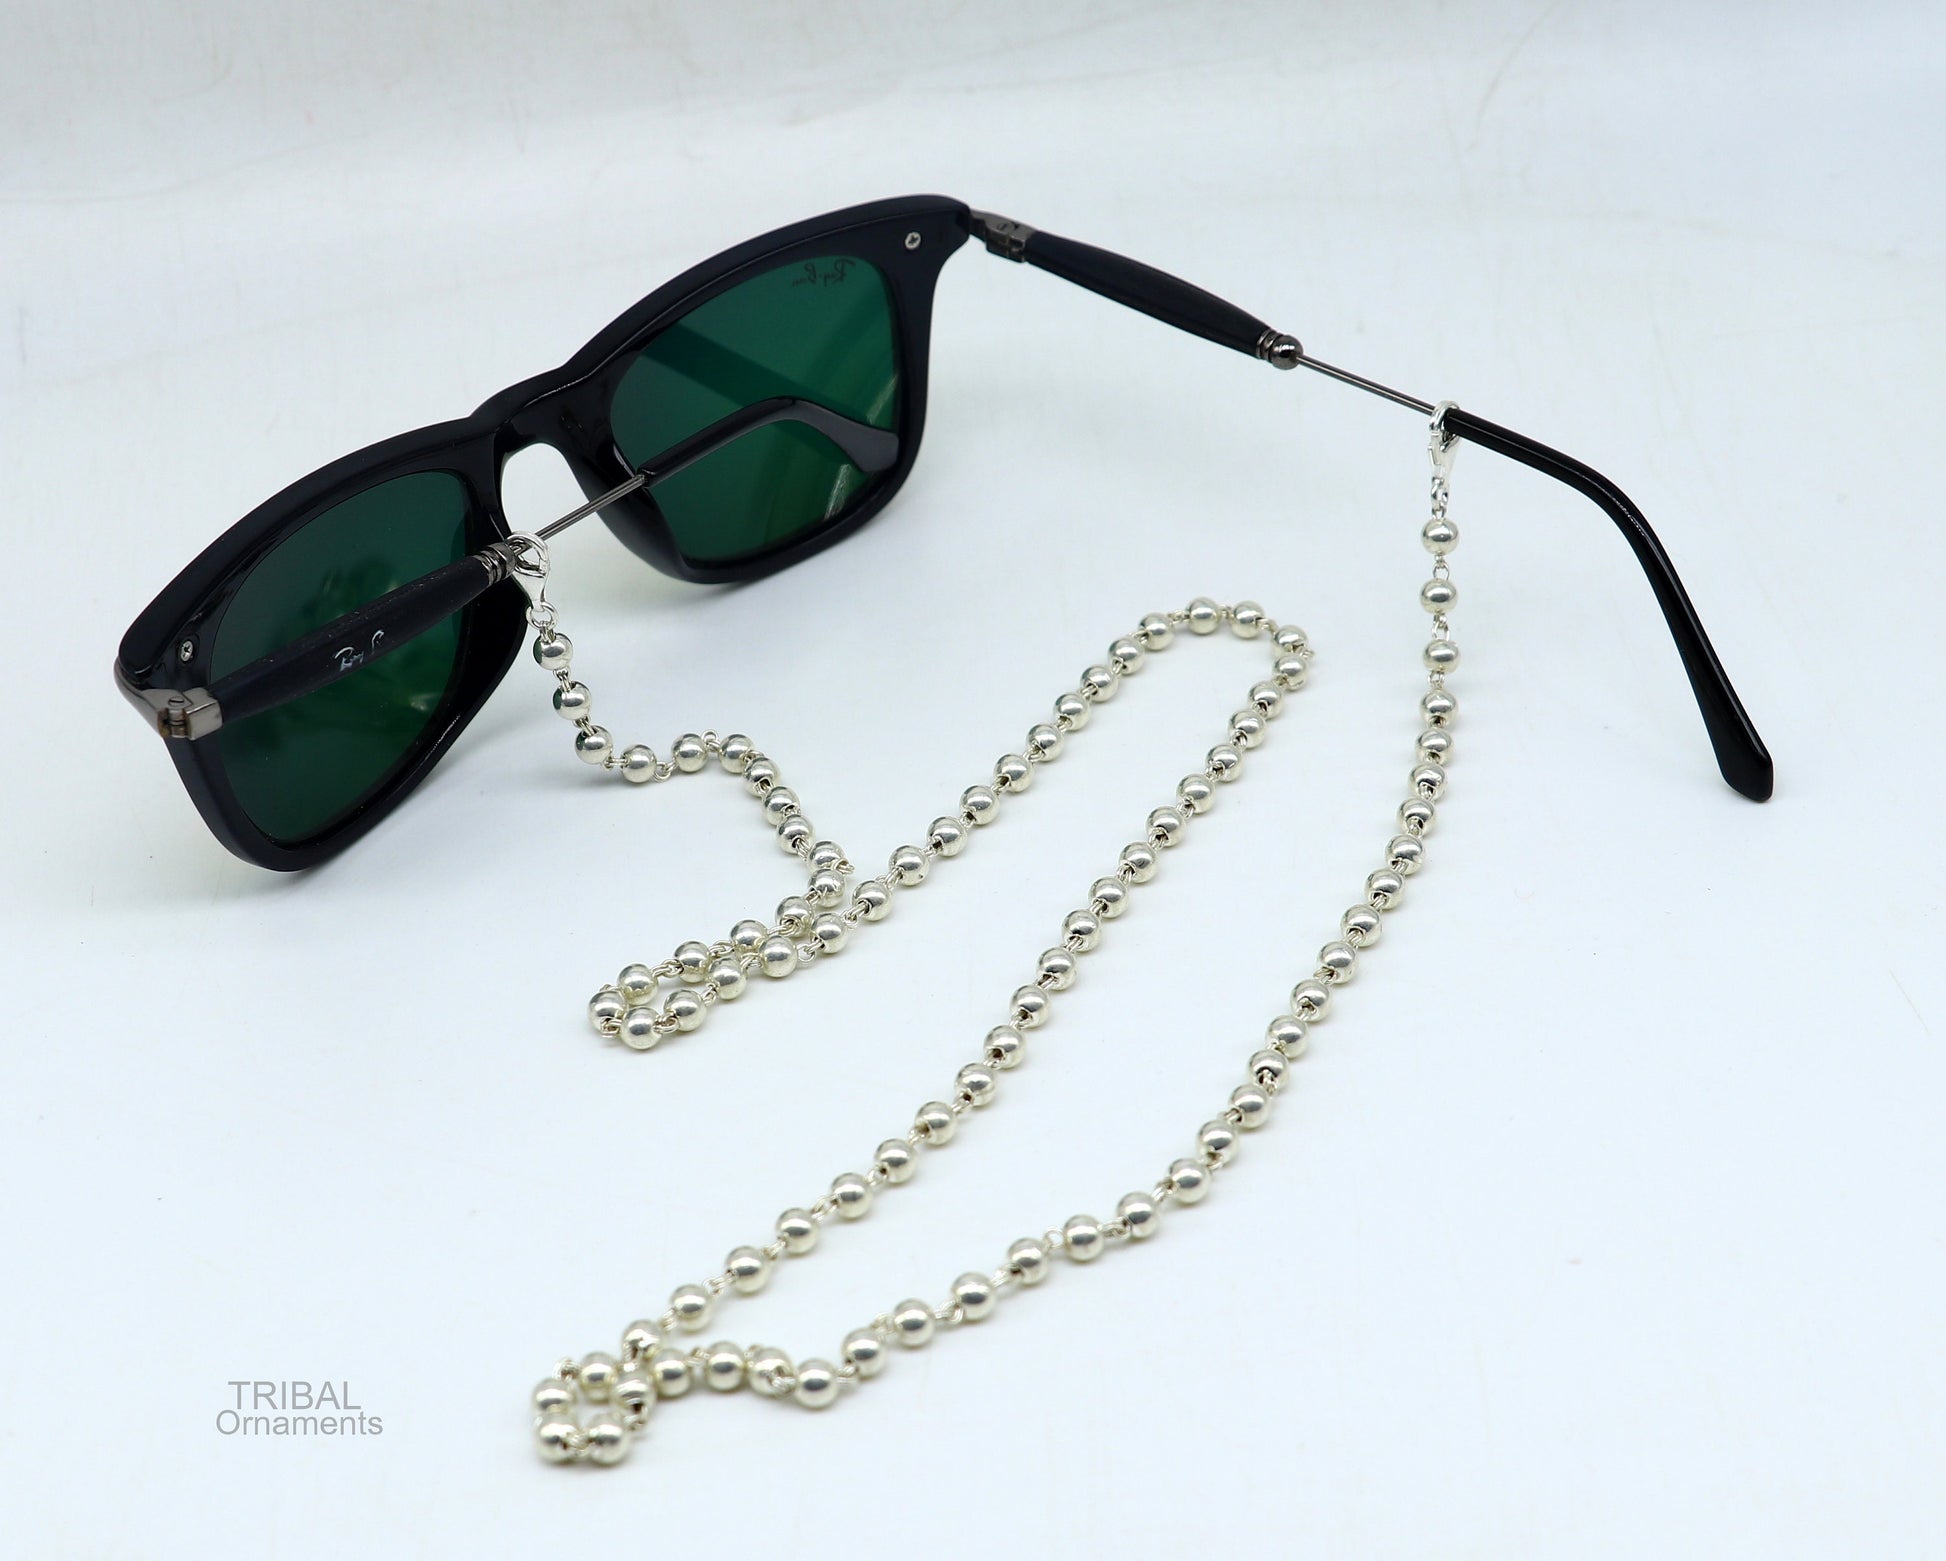 Sterling silver Face Mask Chain ,Eyeglass Glasses Chains, Mask Chain Necklace, Women Stylish Sunglass Eyeglass Cord mask chain ch135 - TRIBAL ORNAMENTS